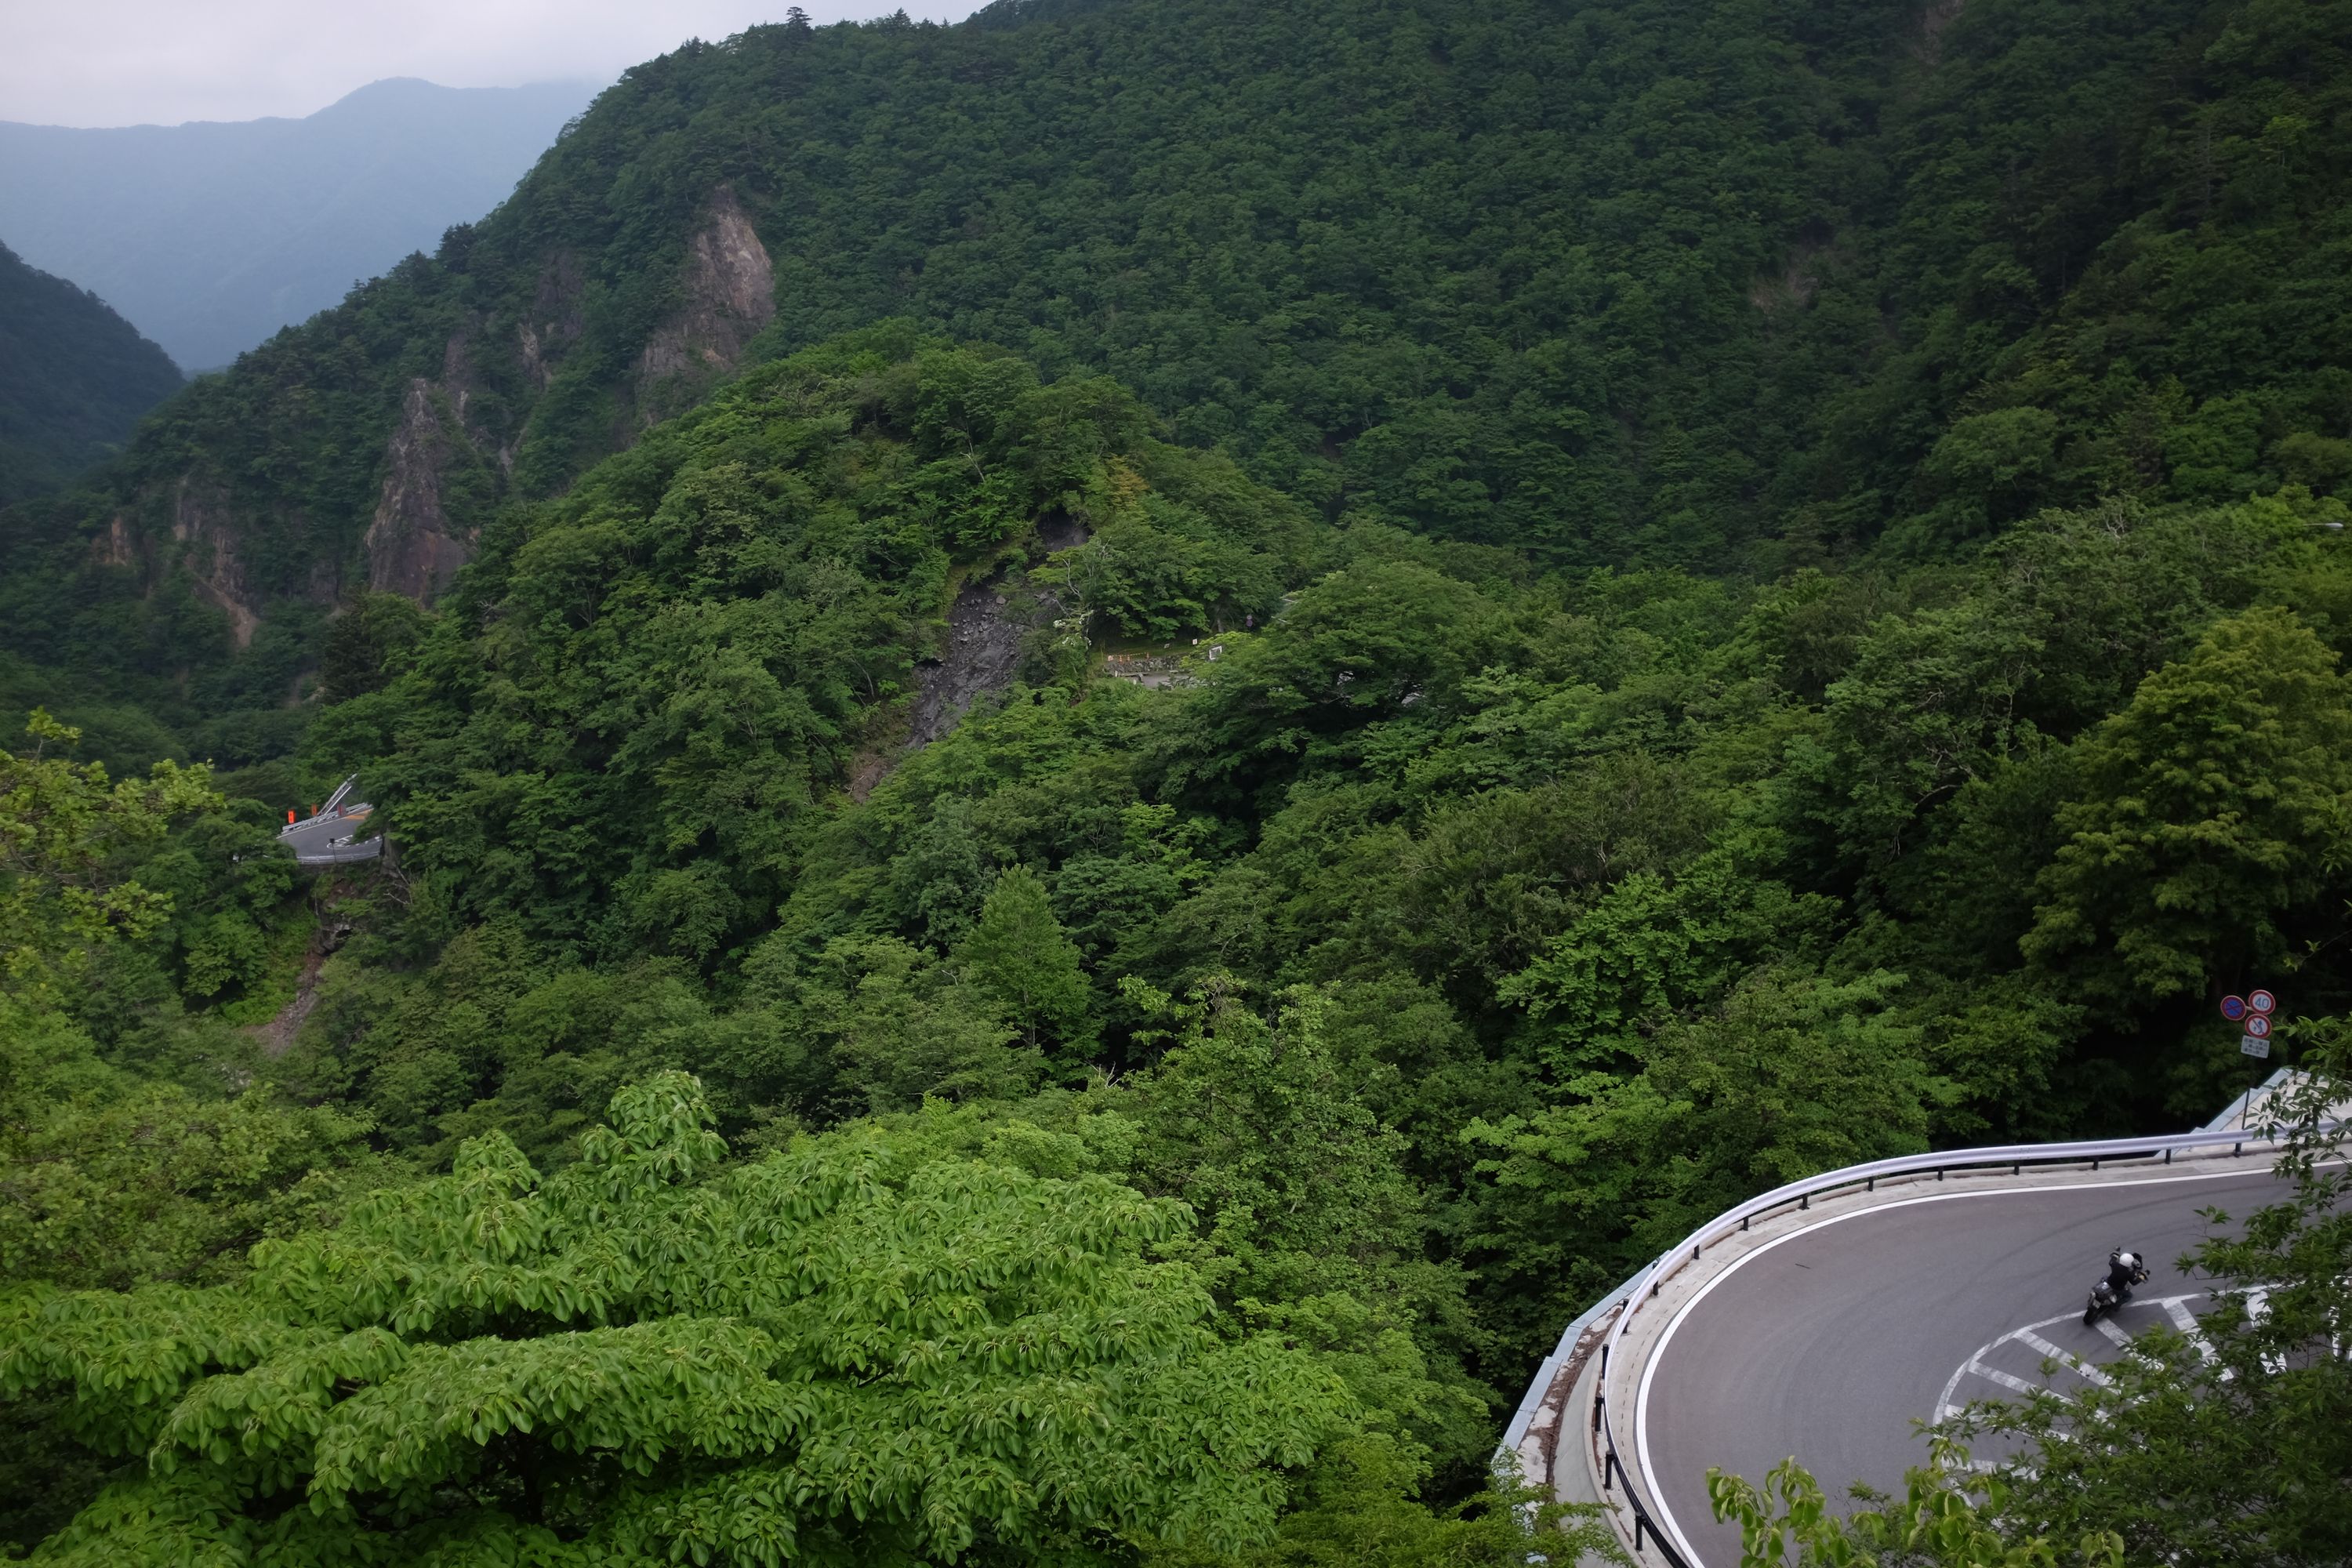 A motorcycle takes a corner on a road winding down a steep, forested mountainside.